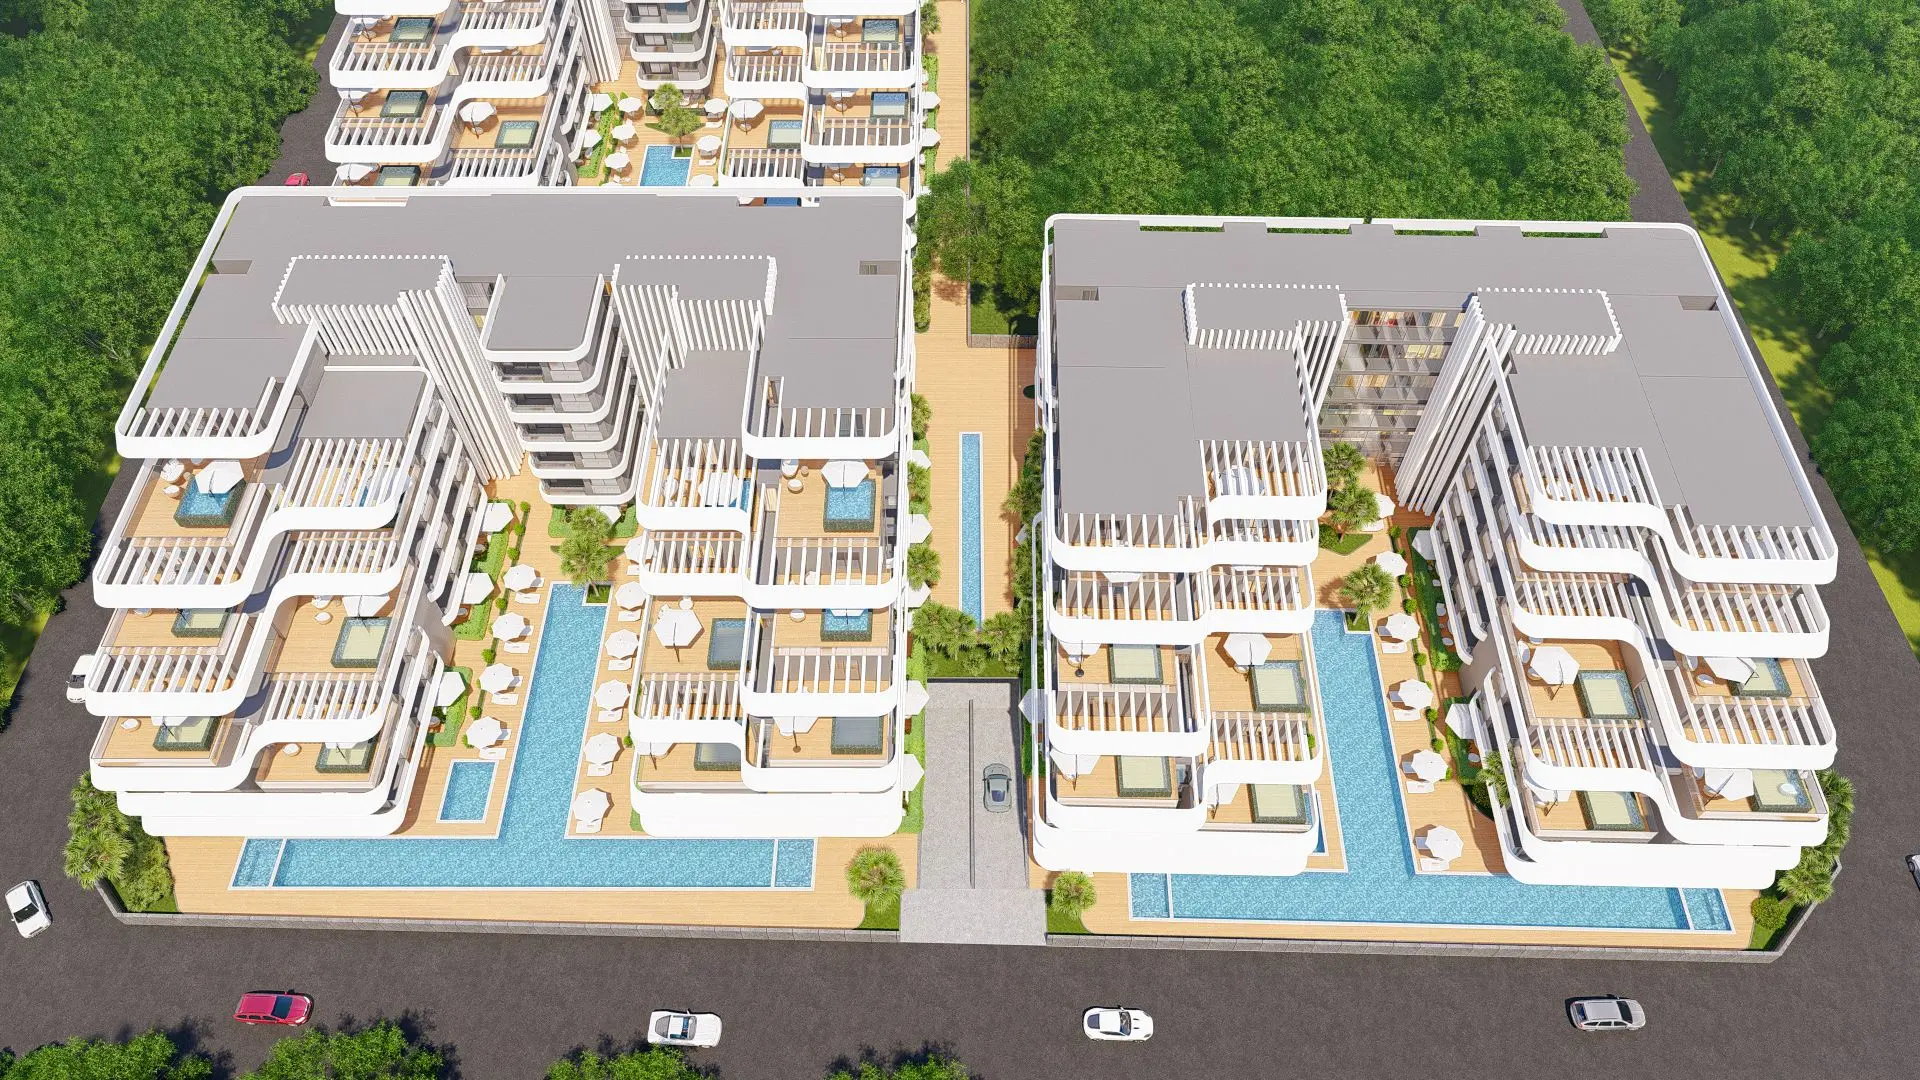 NEW MAGNIFICENT HOUSING PROJECT IN ANTALYA